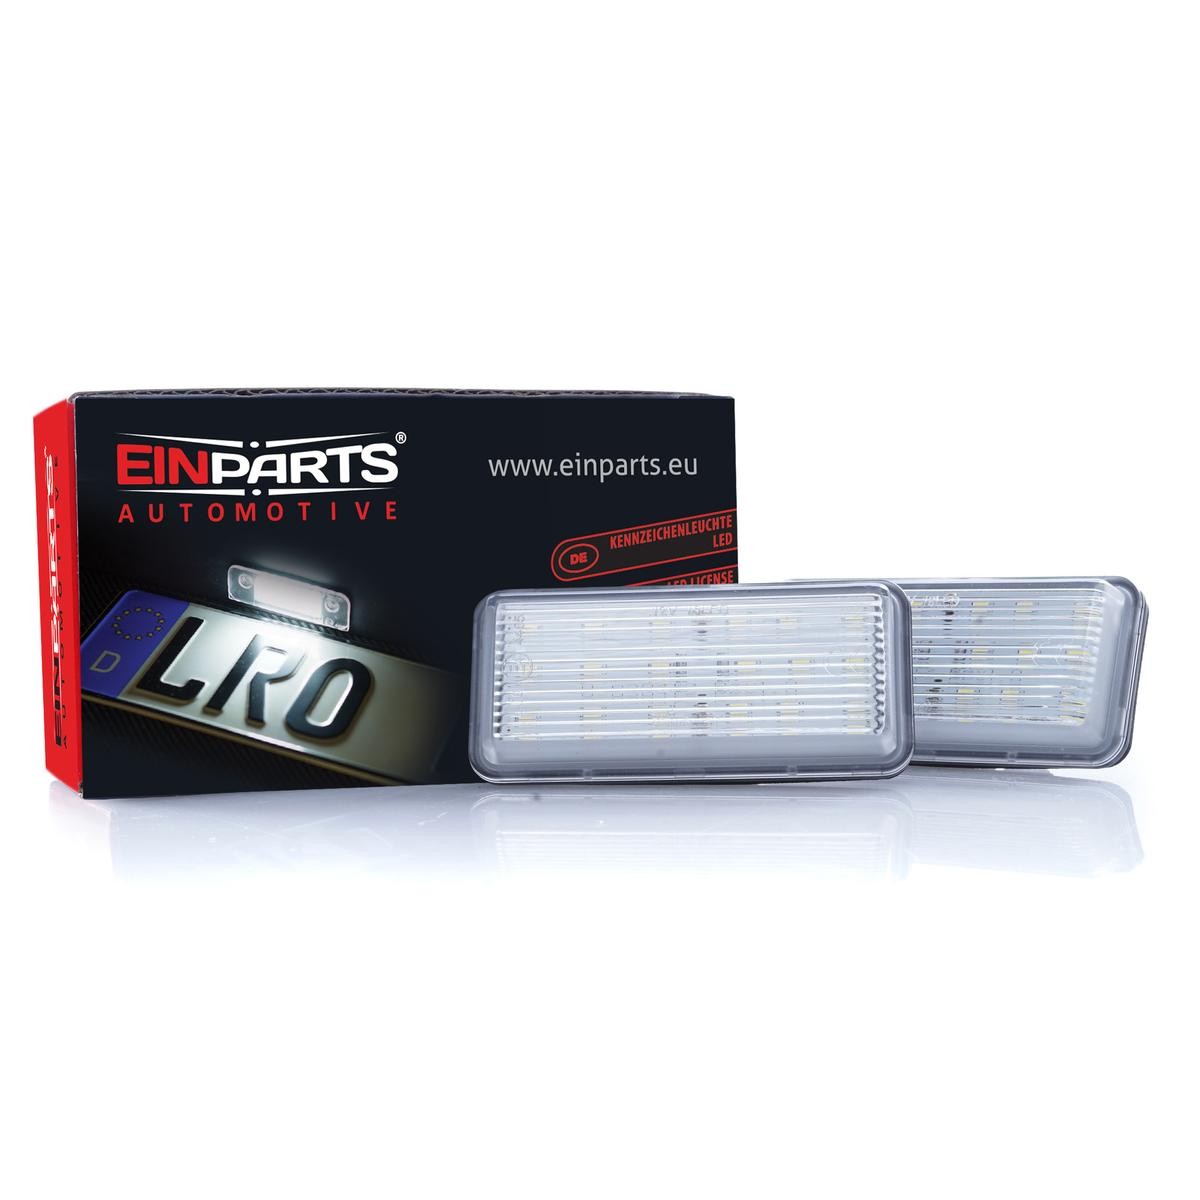 EINPARTS LED Suitable for CAN bus systems Licence Plate Light EP94 buy